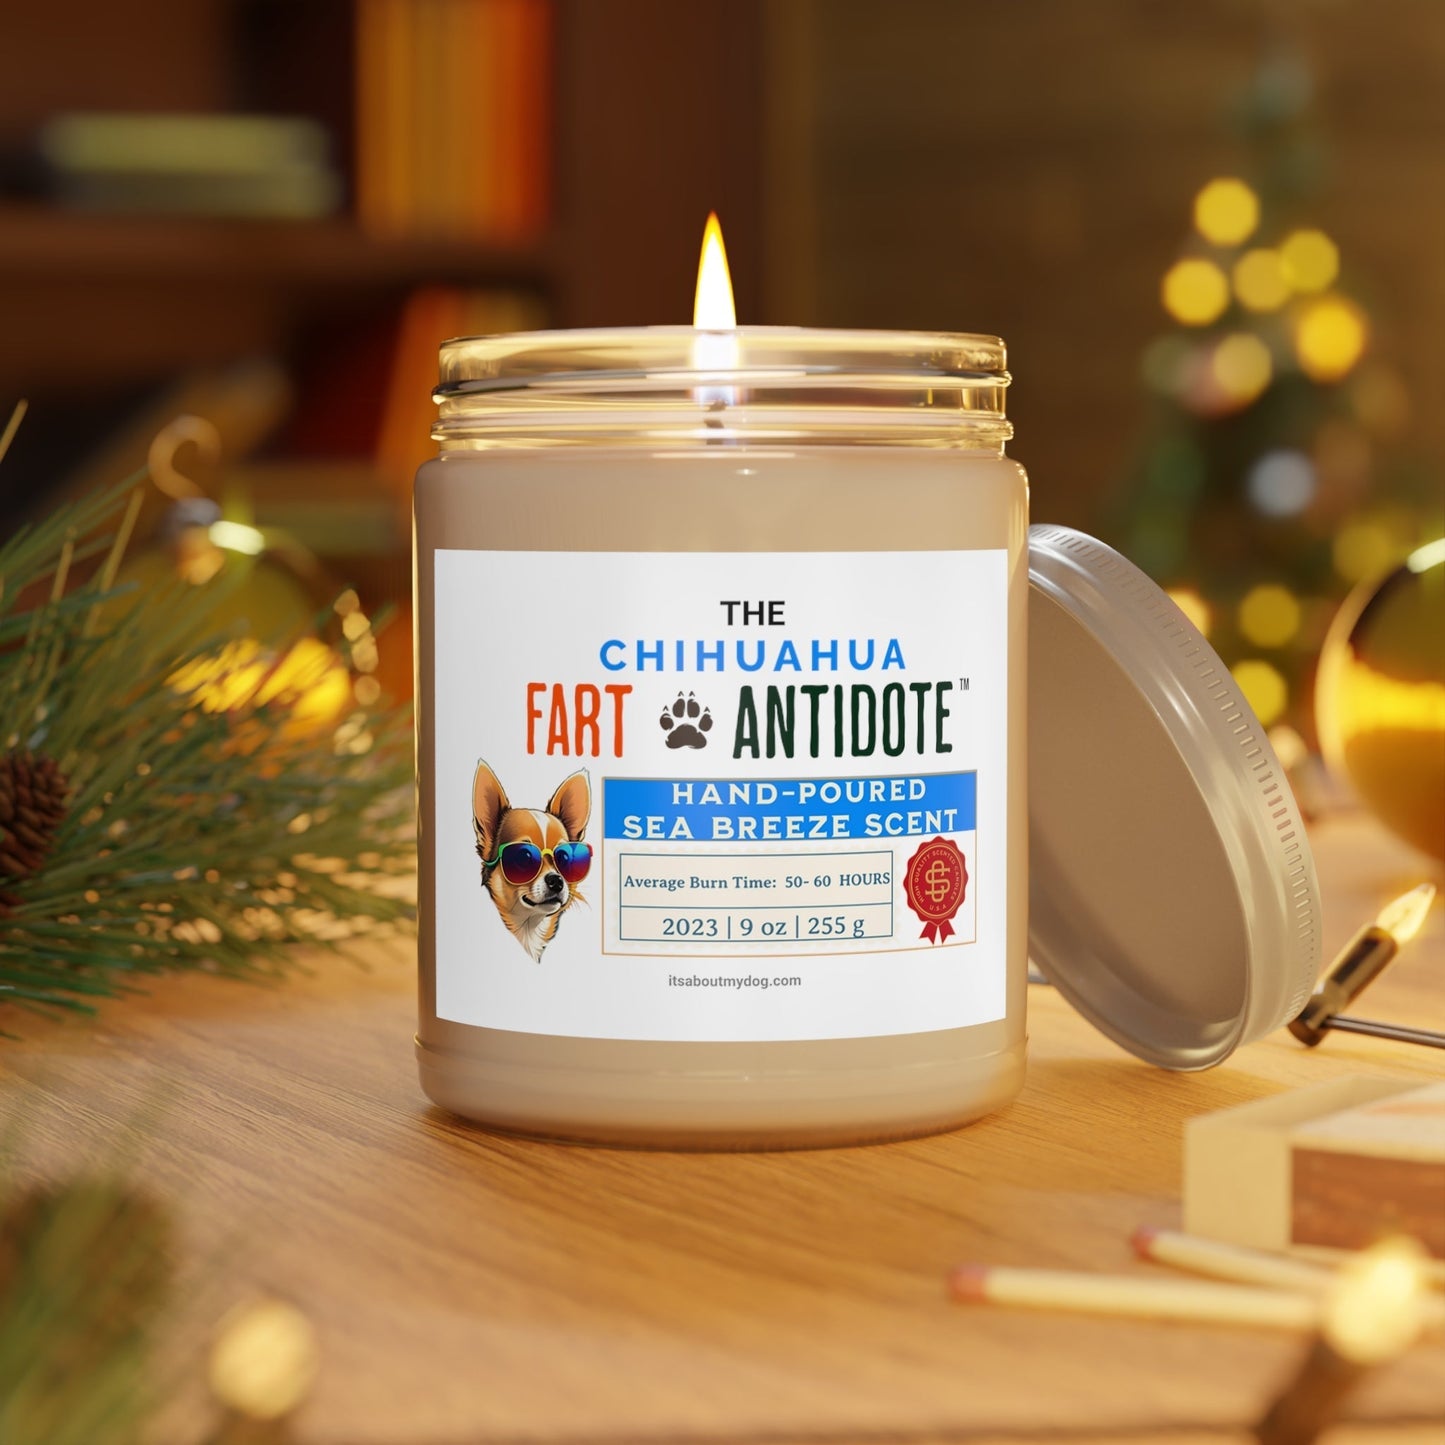 Chihuahua Dog Fart Antidote - Sea Breeze Scented Candles, 9oz27.99-(FREE Delivery) Shop now at itsaboutmydog.com, chihuahua puppies, vive chihuahua fest